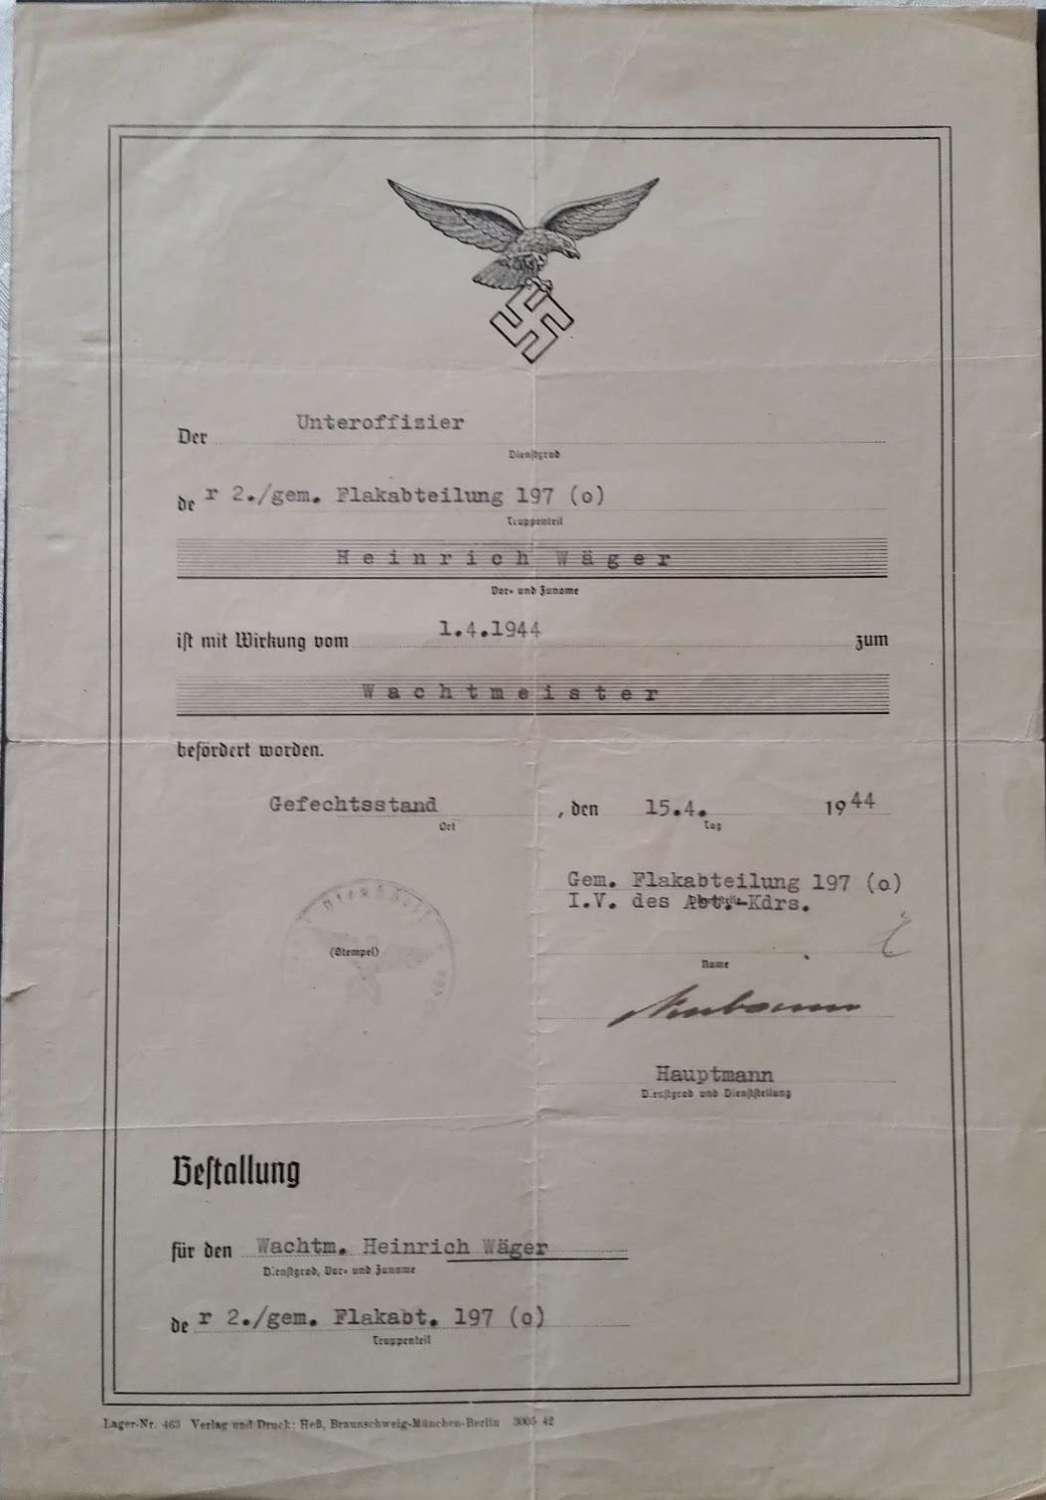 Luftwaffe Appointment Certificate